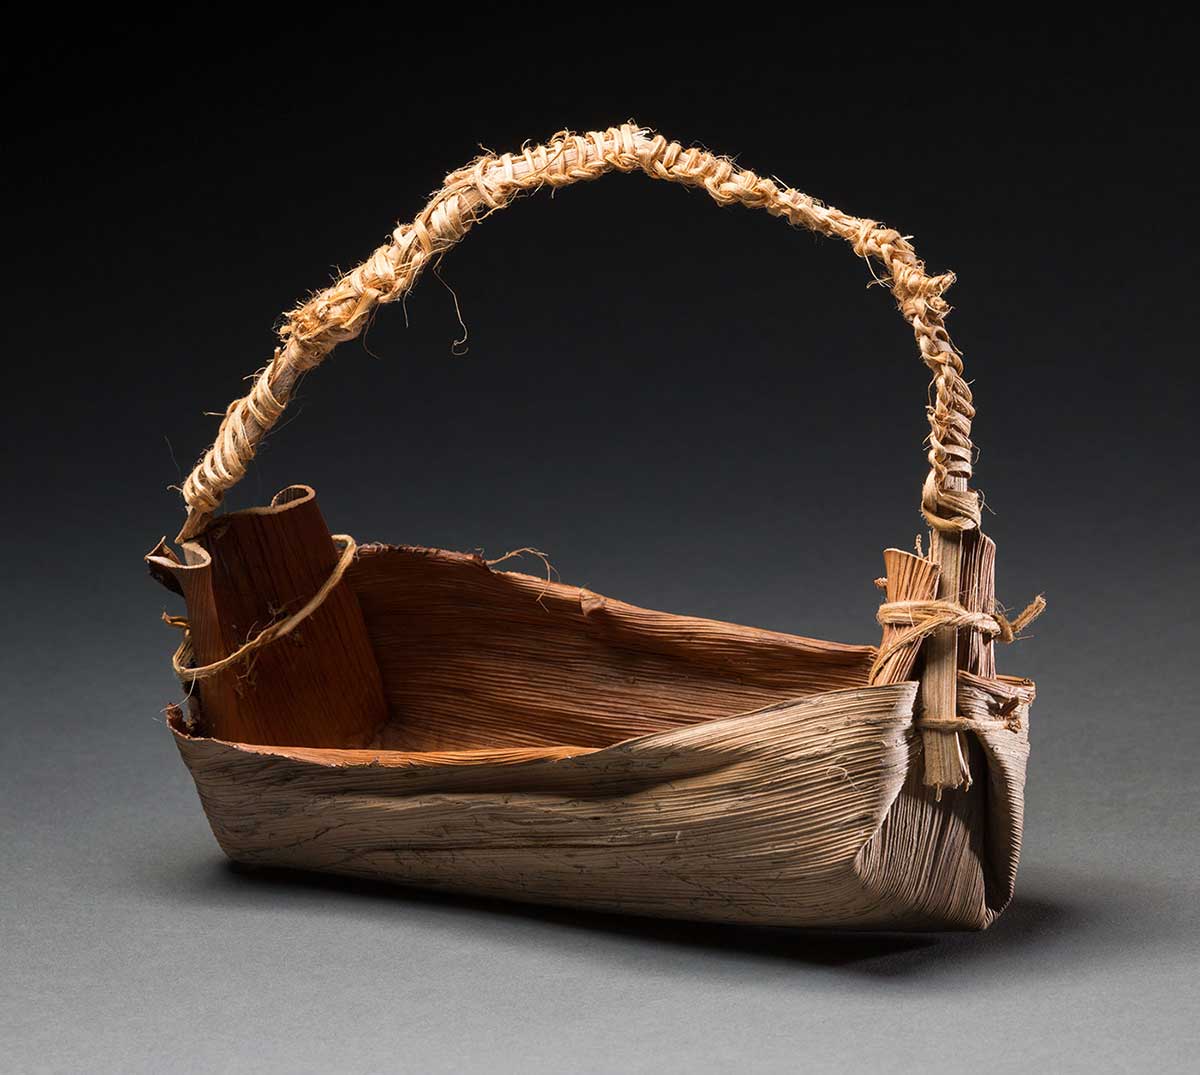 A rectangular shaped basket with a handle made of natural fibres. The handle has other natural fibres beige in colour wound around it.